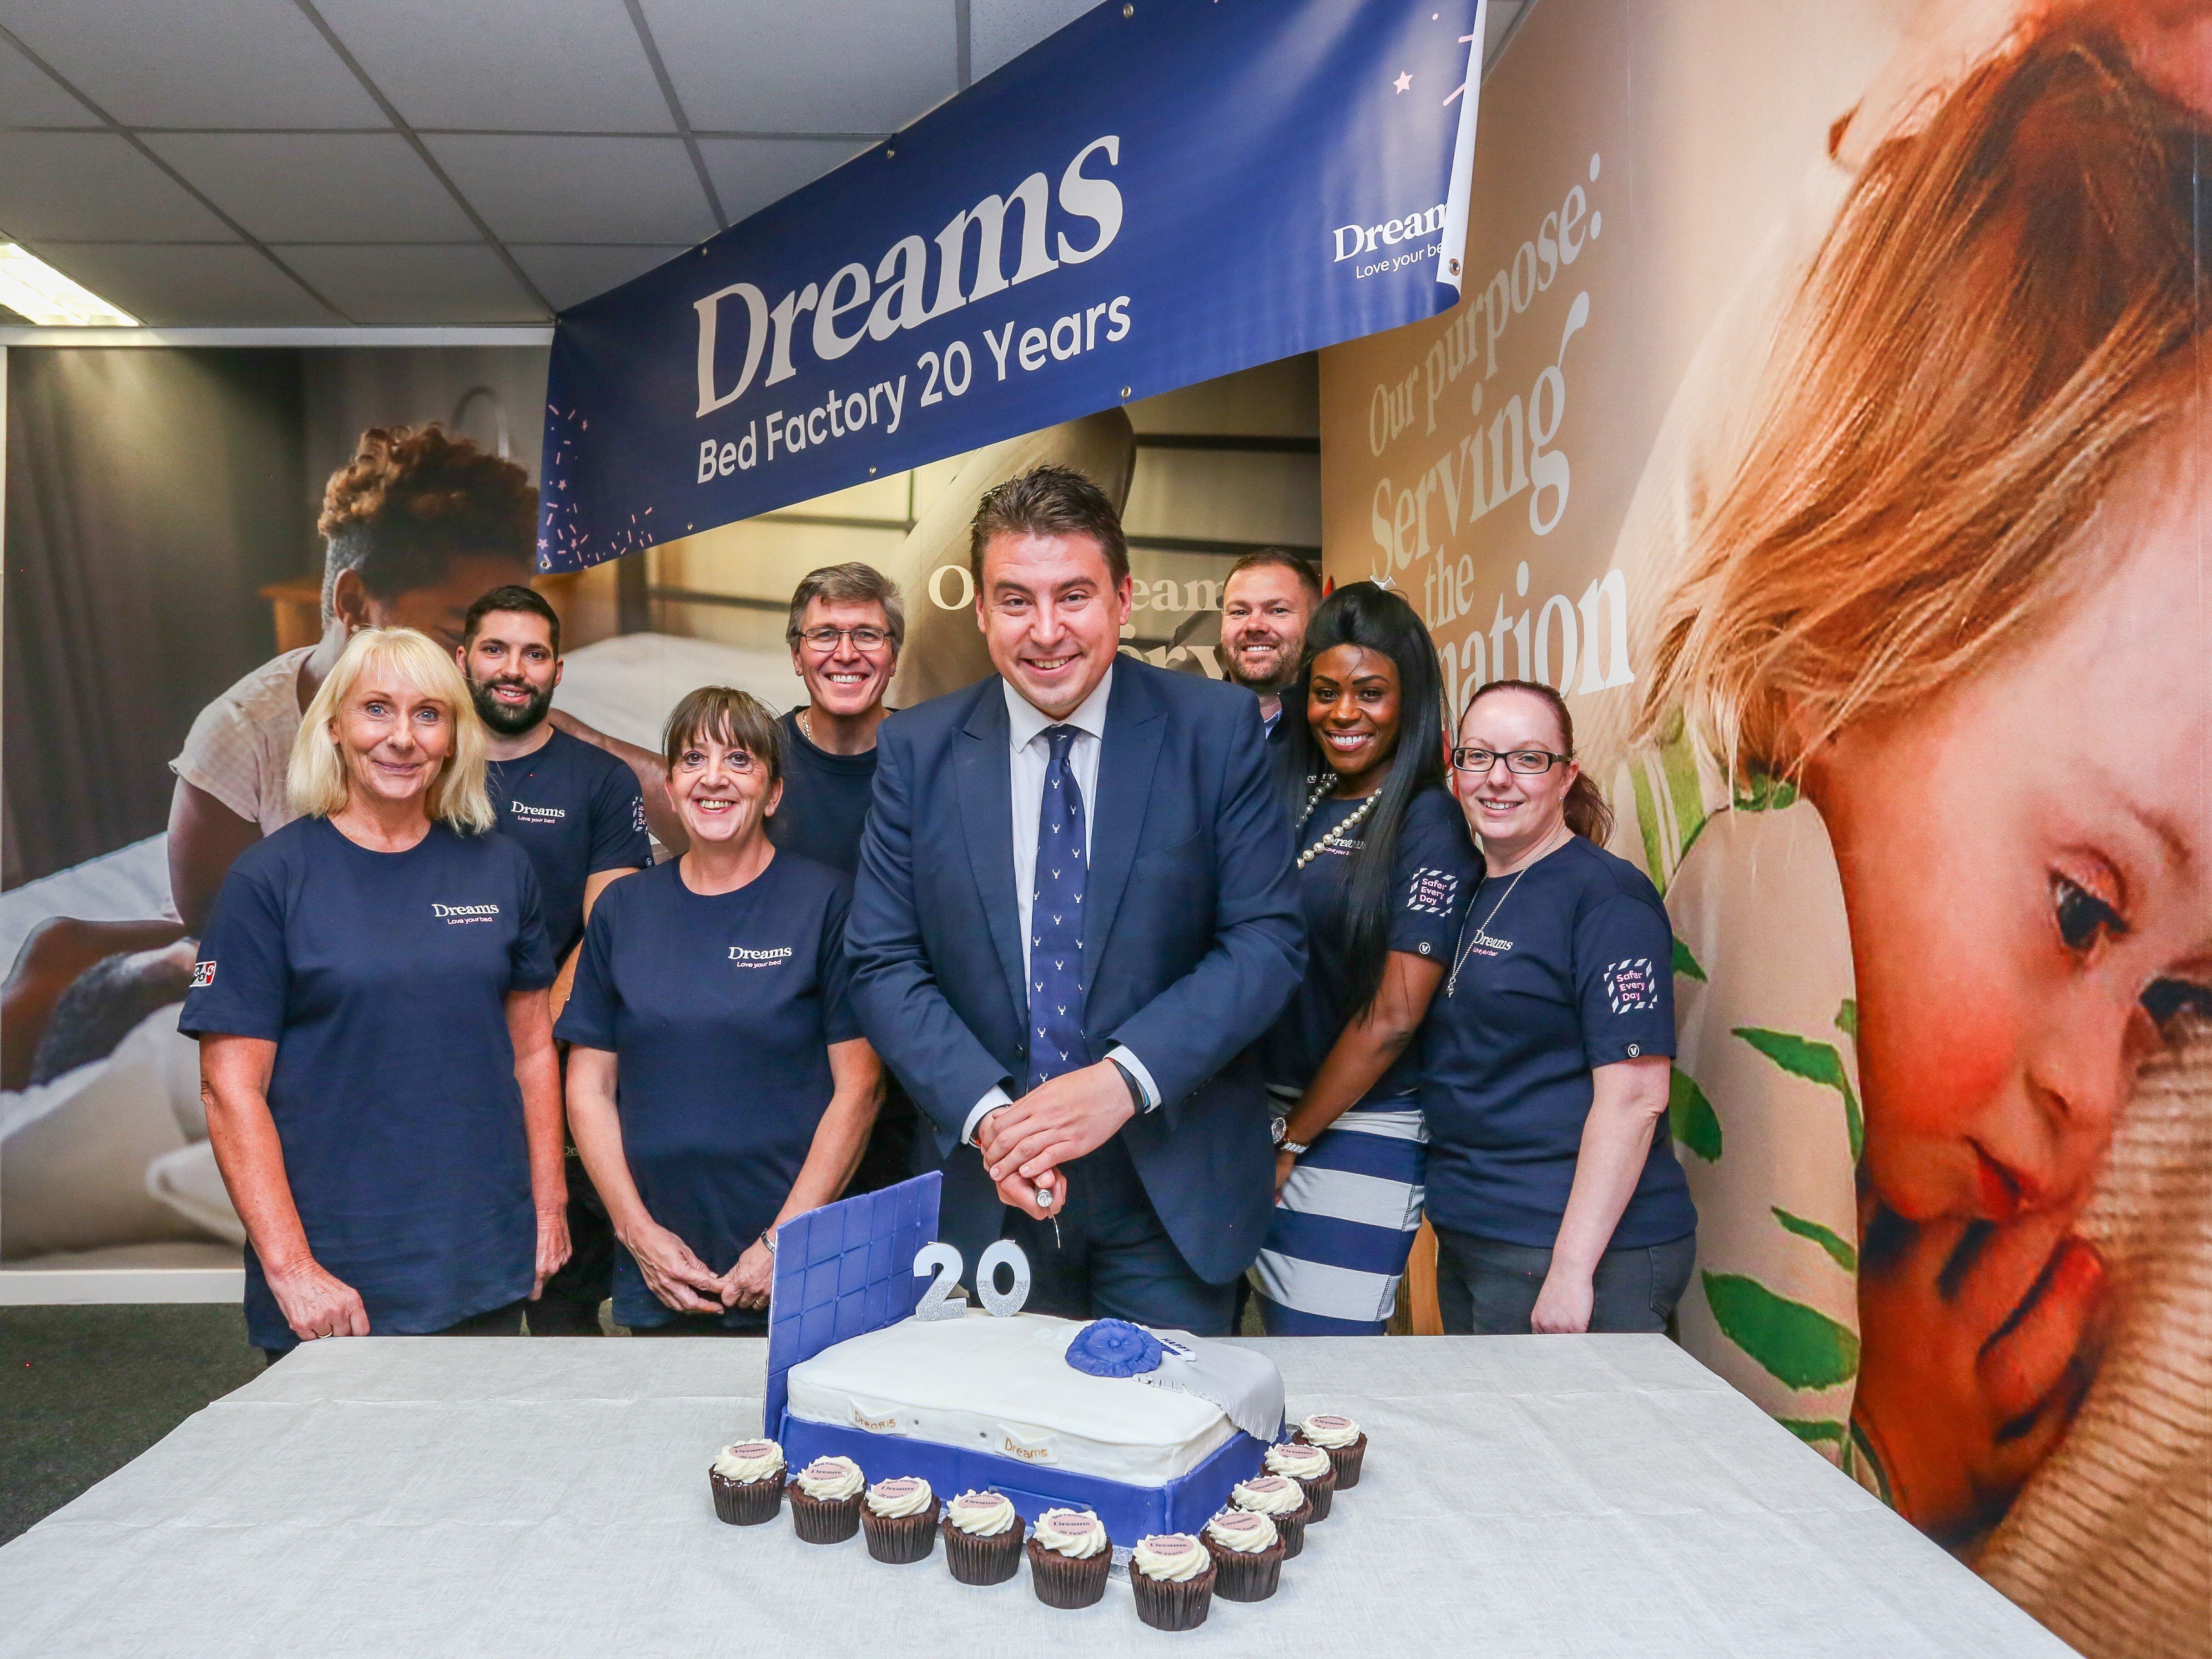 Dreams celebrates 20 years of bed and mattress making in Oldbury